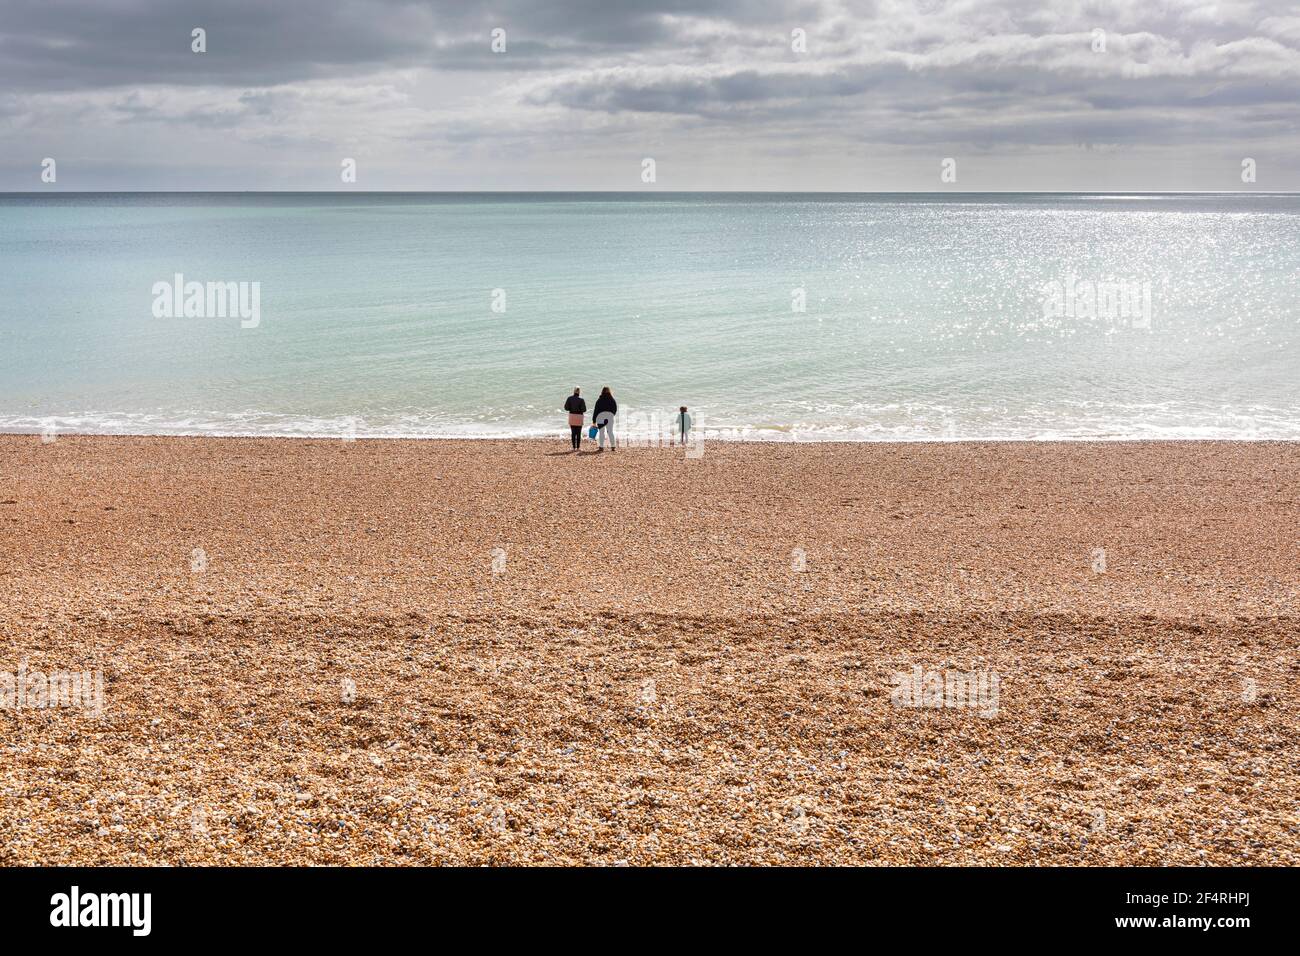 A family of three on an empty beach during covid 19 lockdown Stock Photo